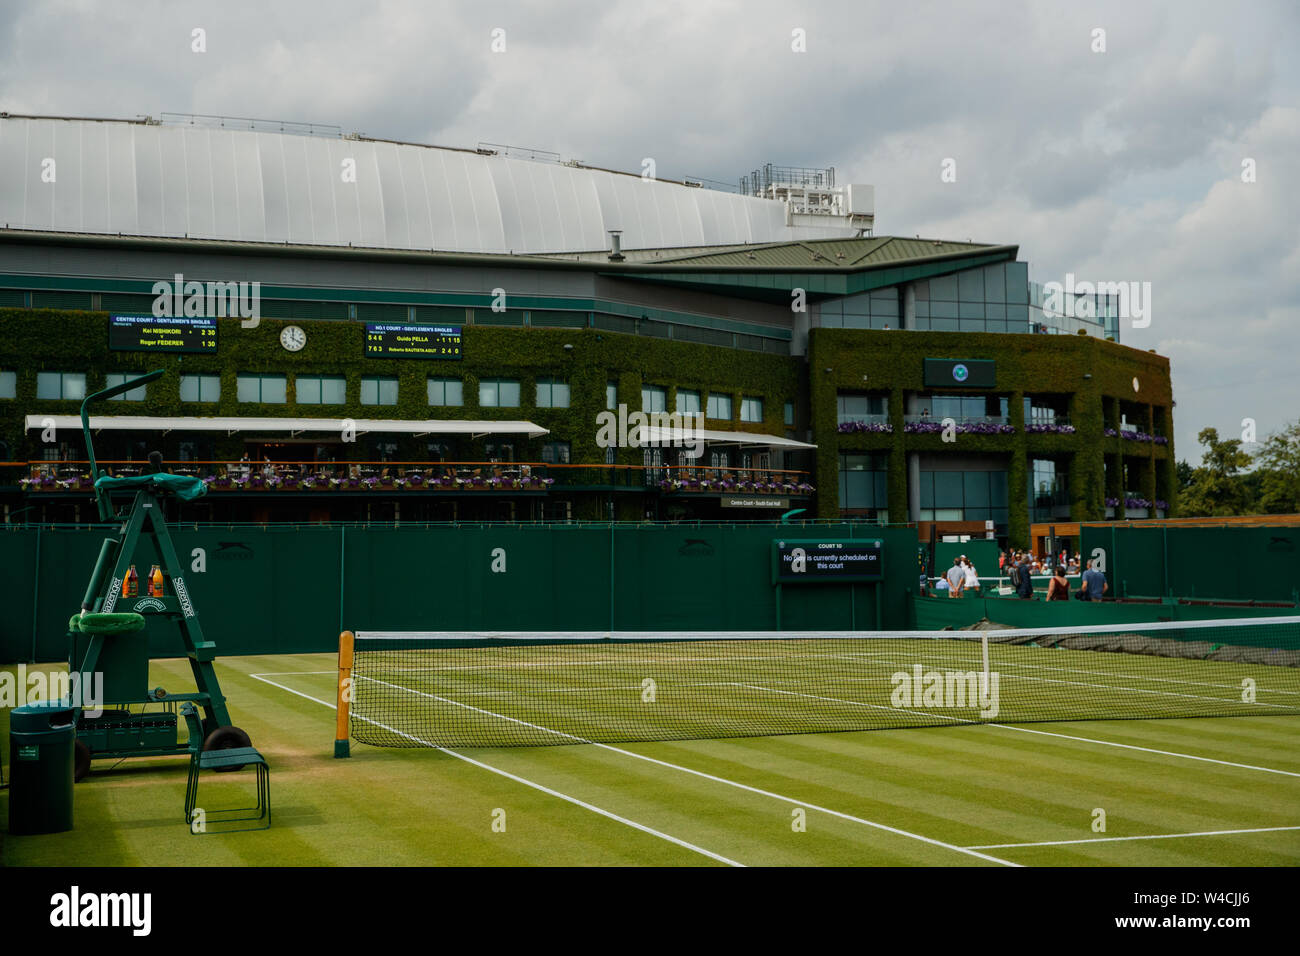 General views of Court 9 and Centre Court during the Wimbledon Championships 2019. Held at The All England Lawn Tennis Club, Wimbledon. Stock Photo